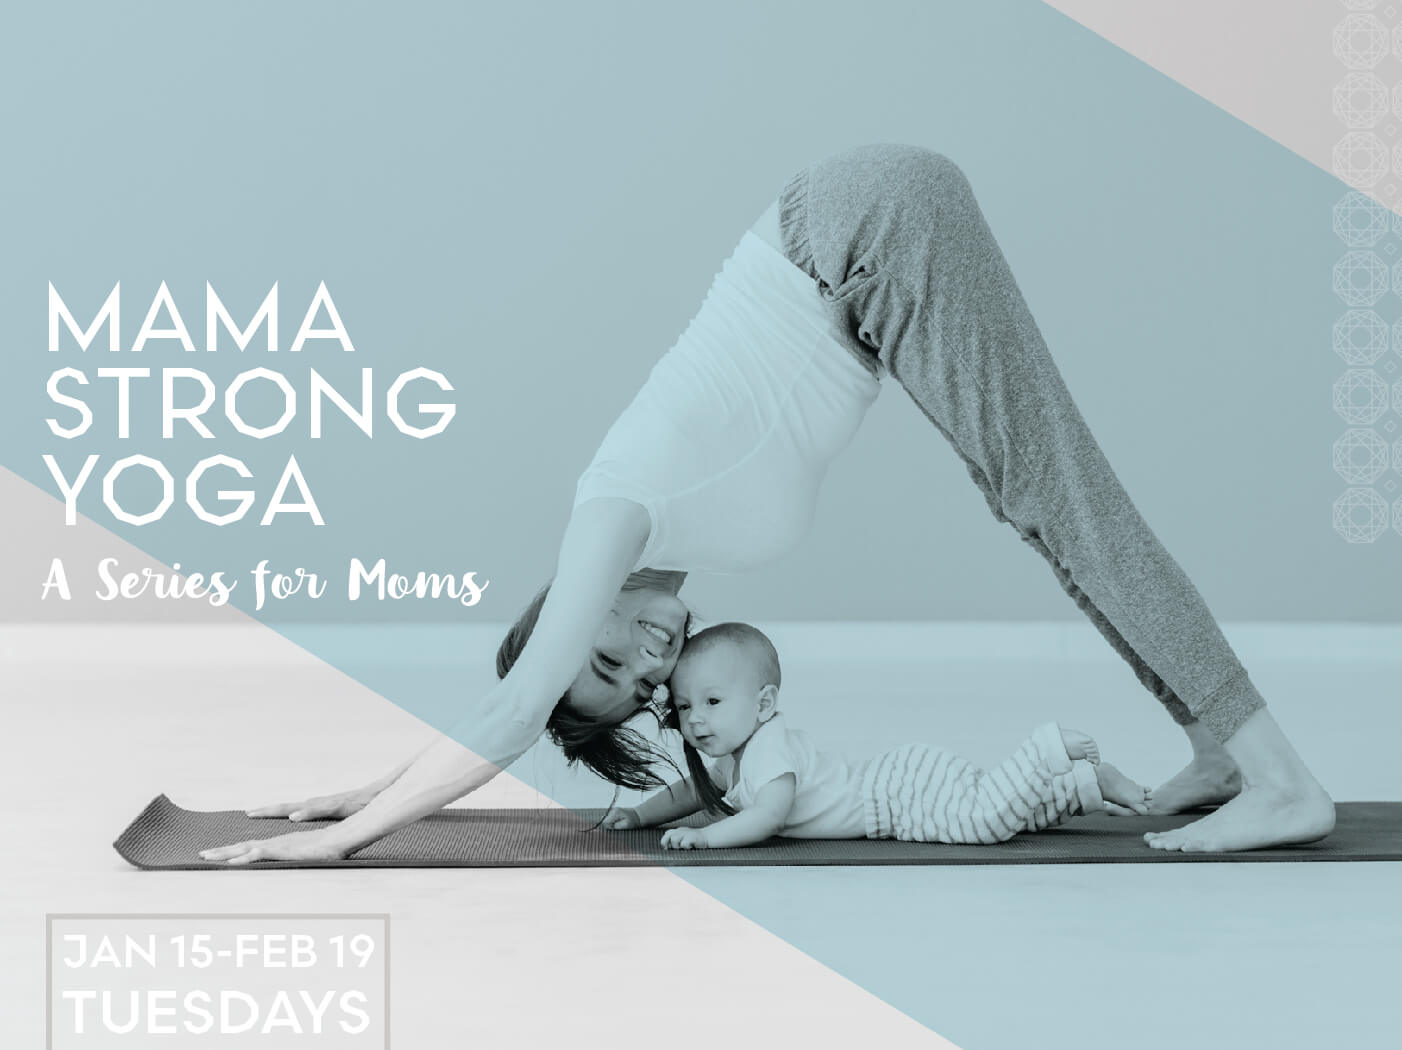 Mama Strong Yoga: A Series for Moms